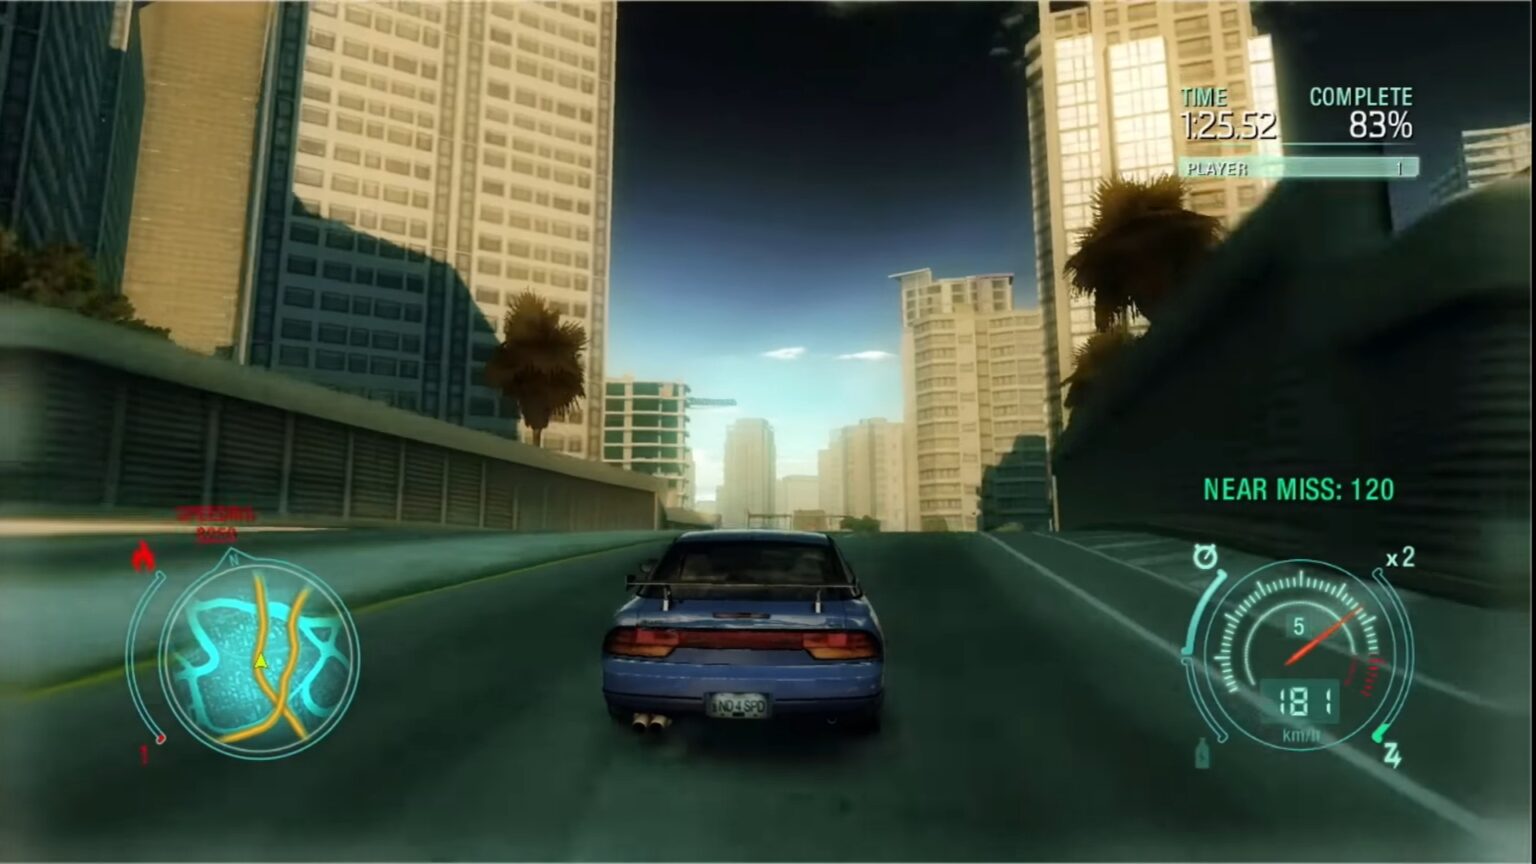 download nfs undercover highly compressed Tasik game